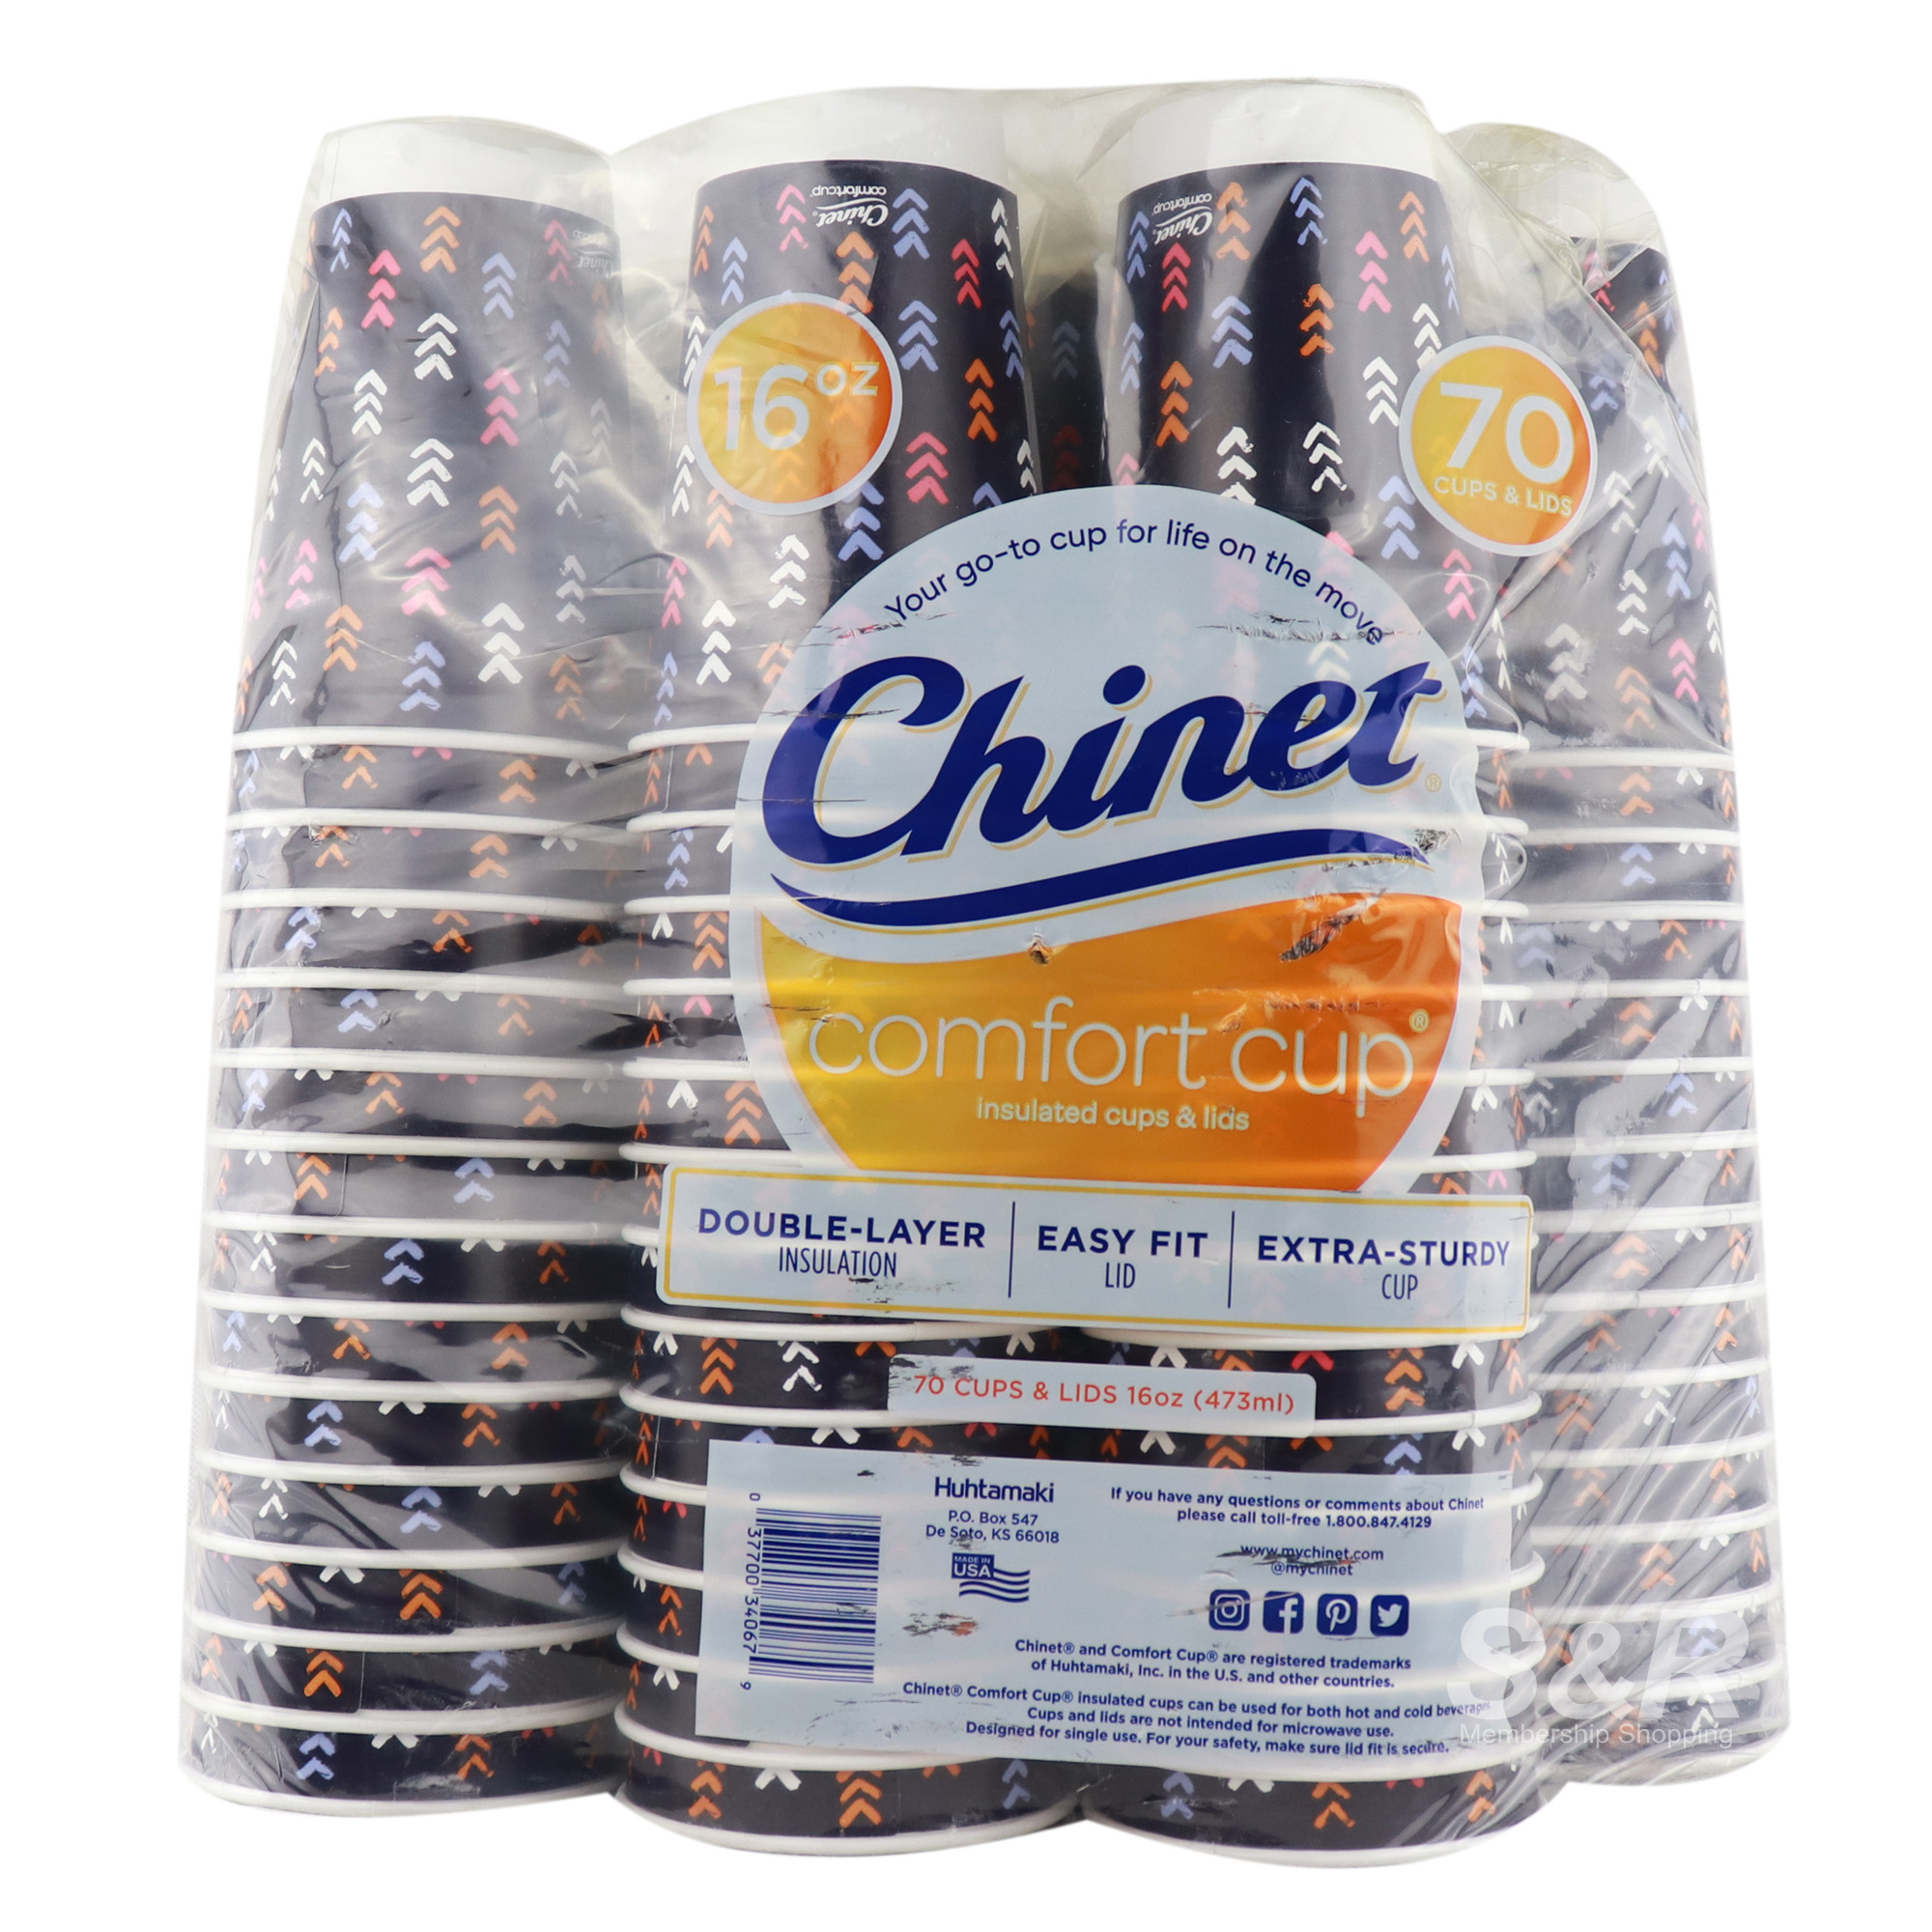 Chinet Comfort Cup Insulated Cups and Lids 70pcs